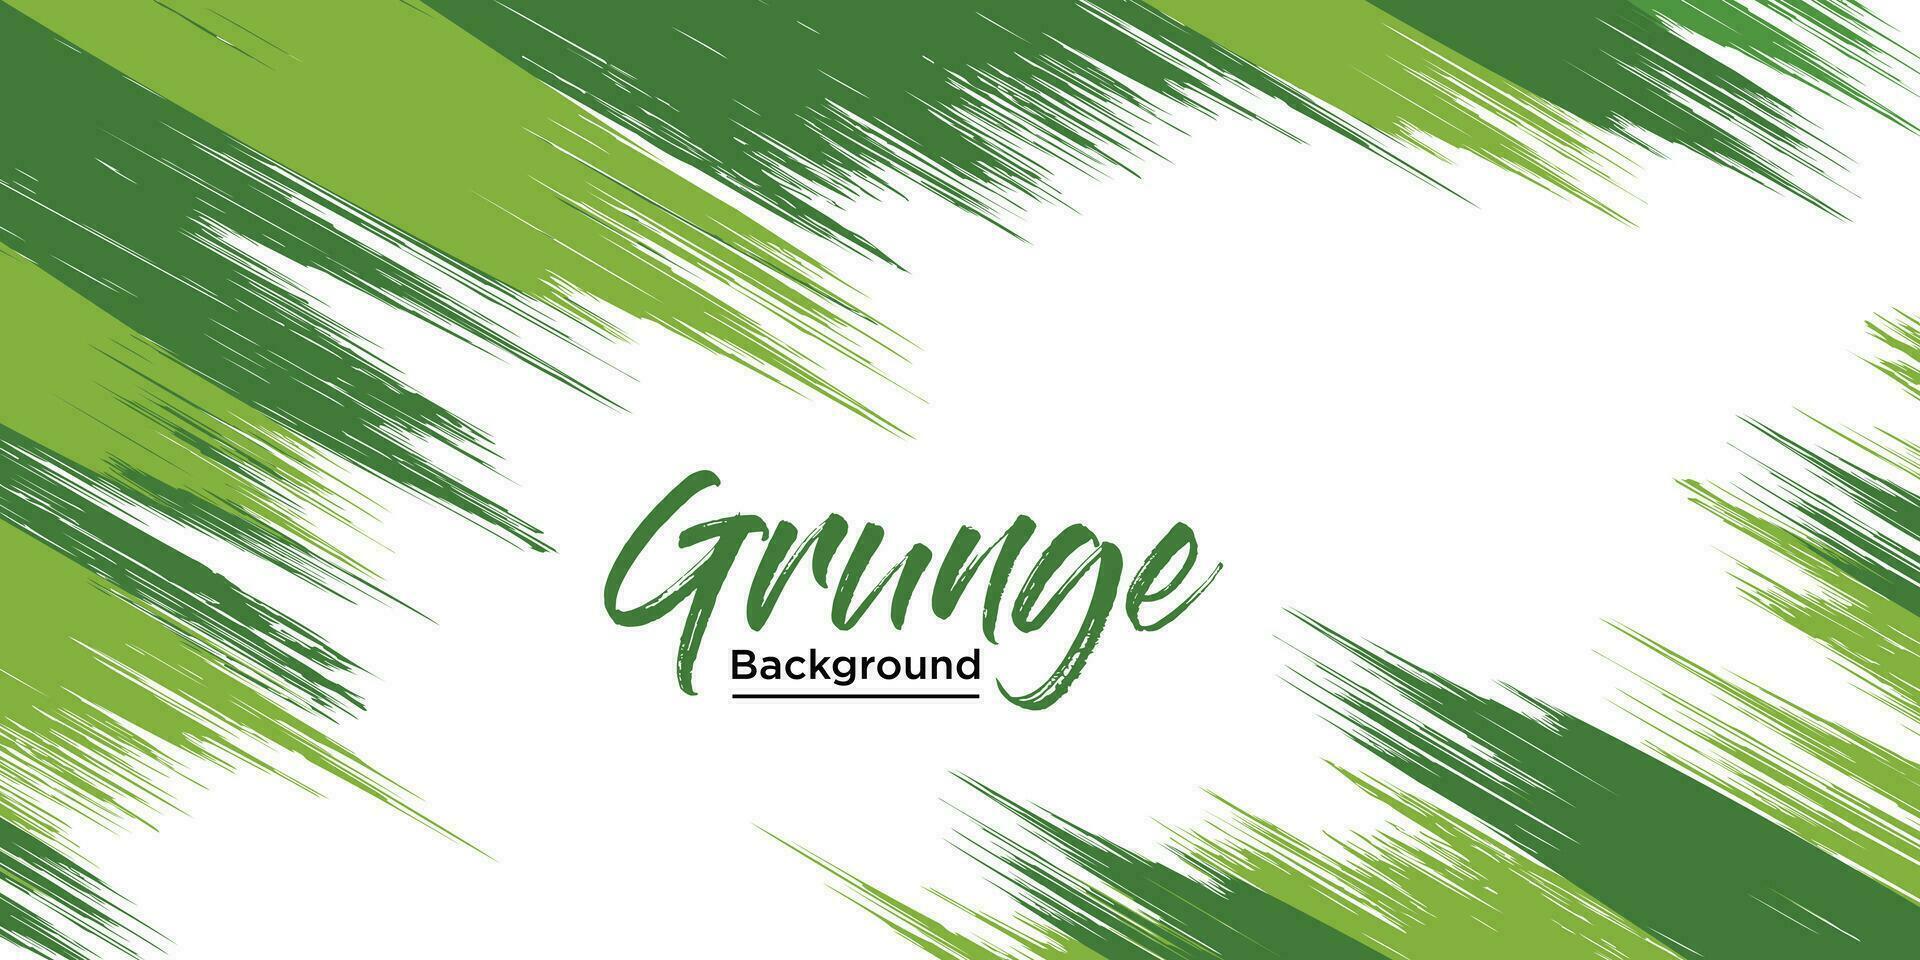 Abstract green and white grunge texture background vector